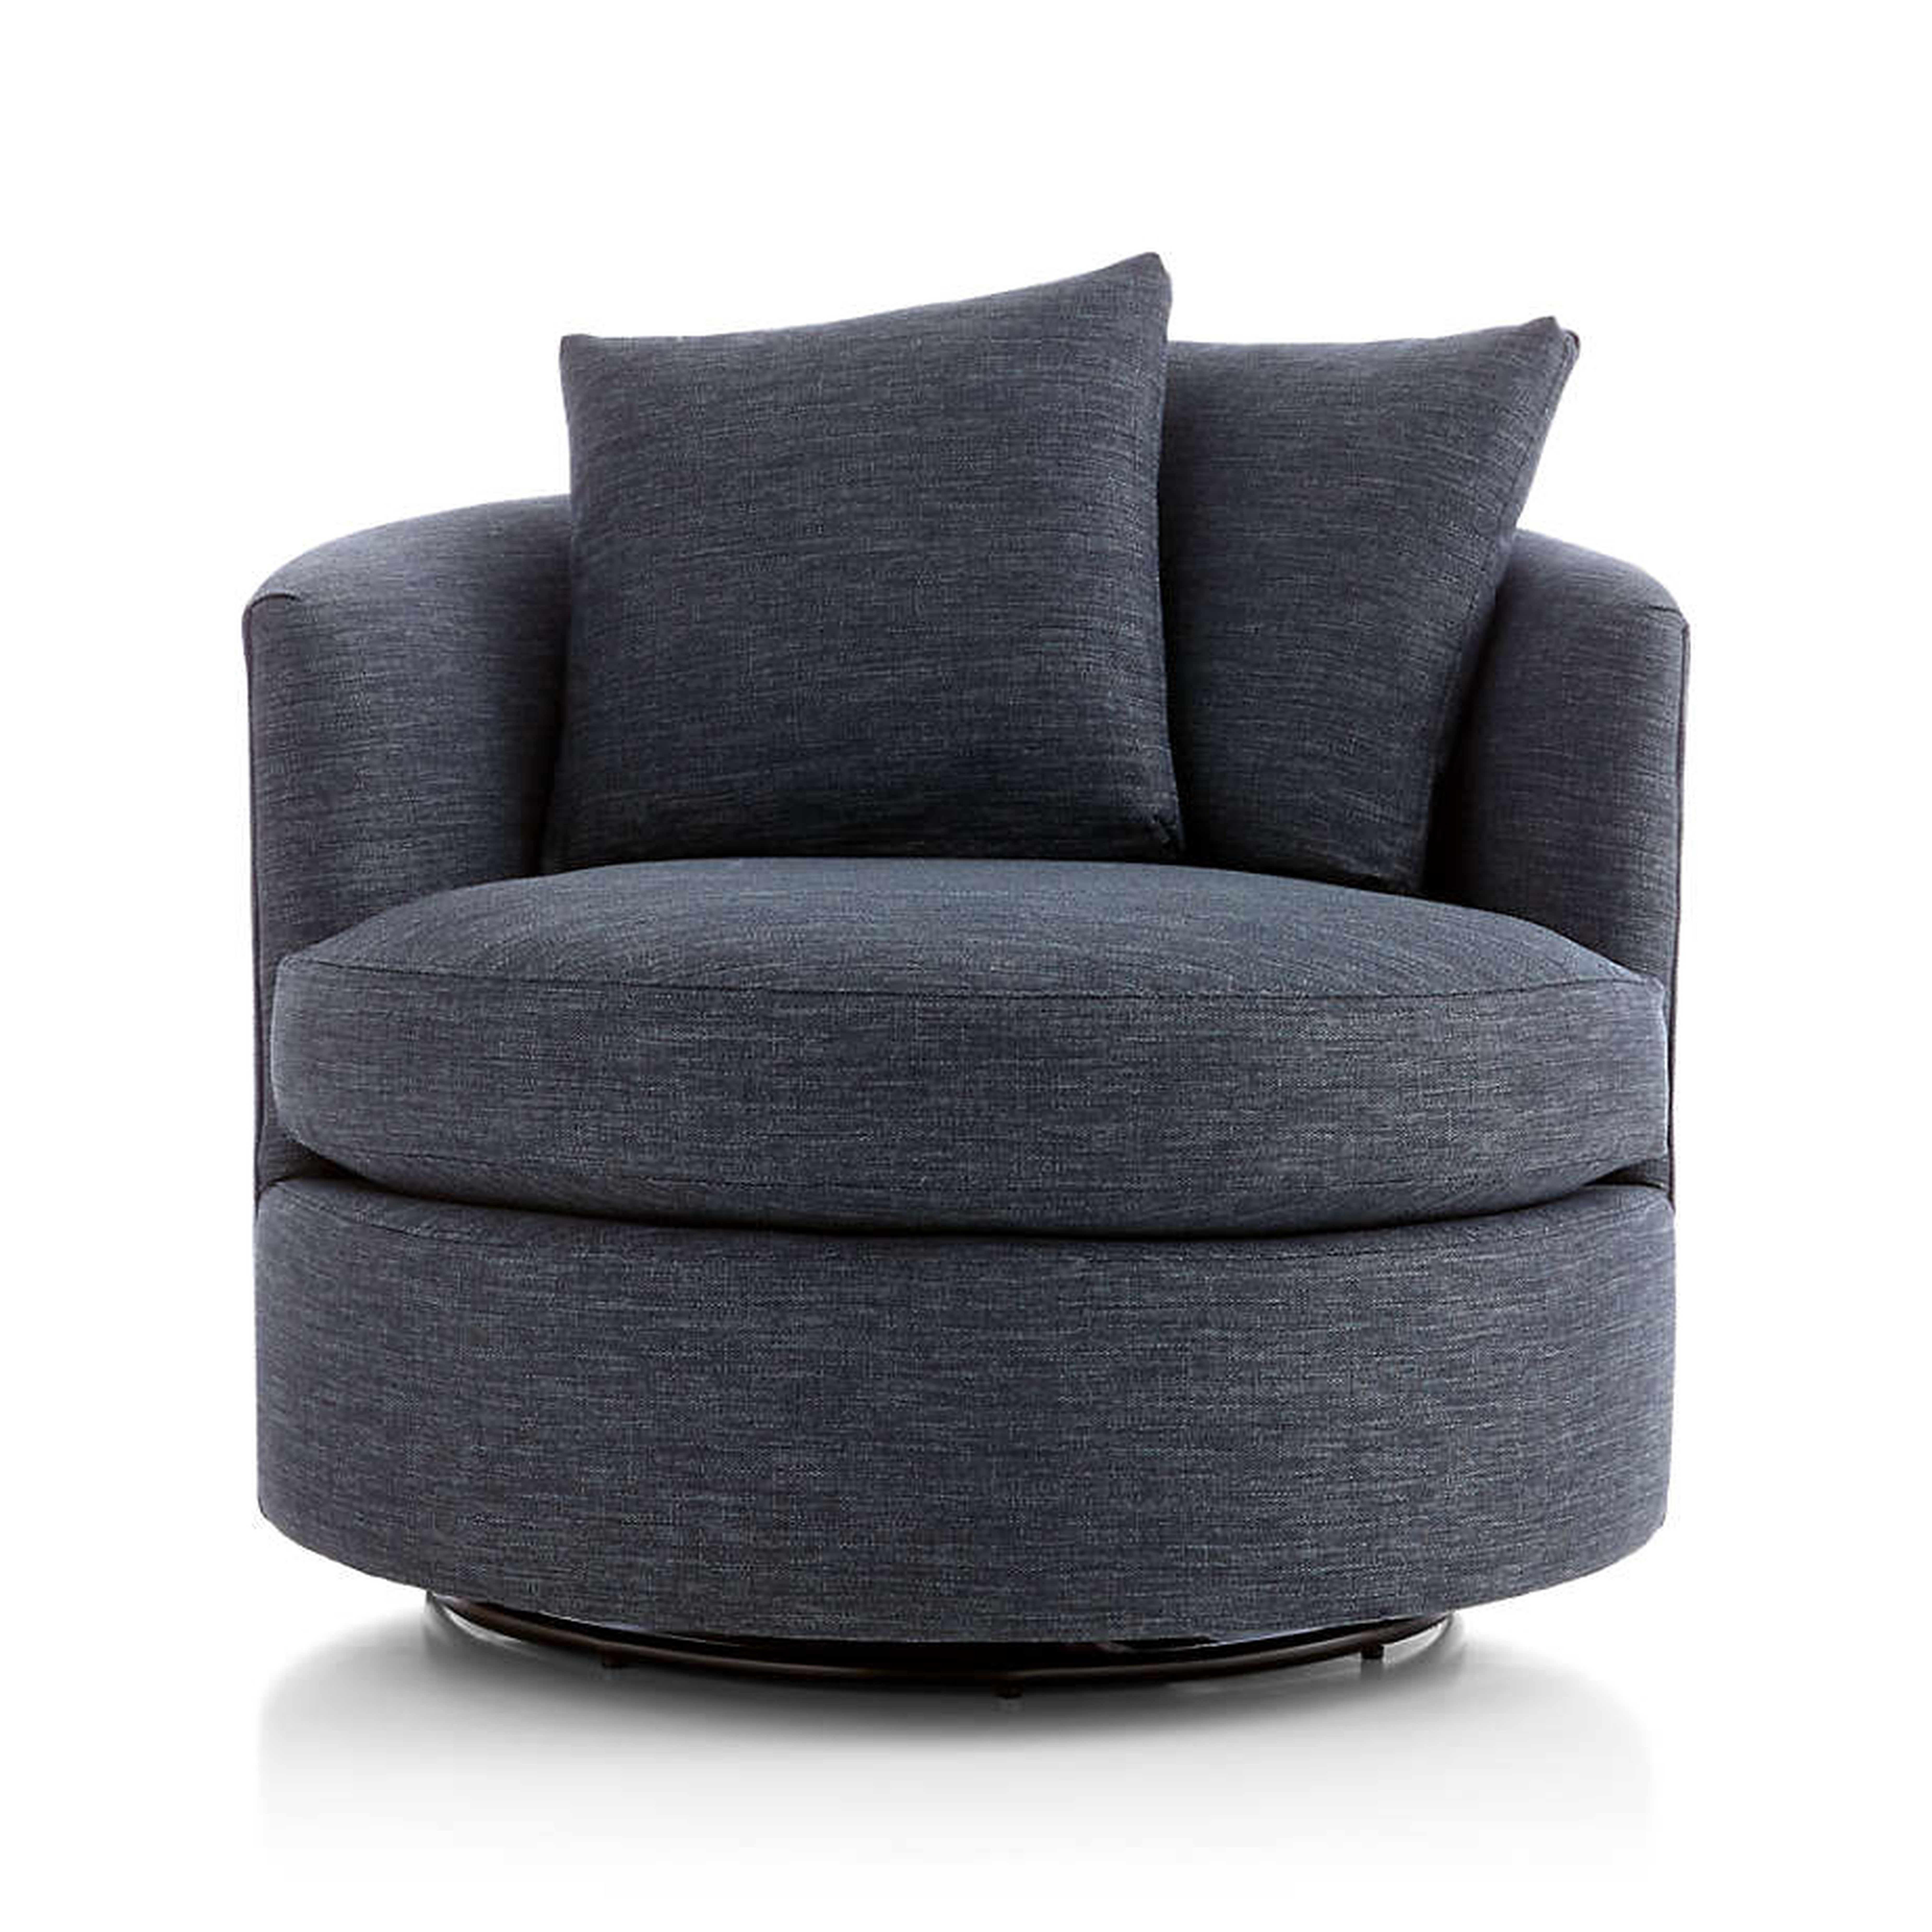 Tillie Swivel Chair - Crate and Barrel